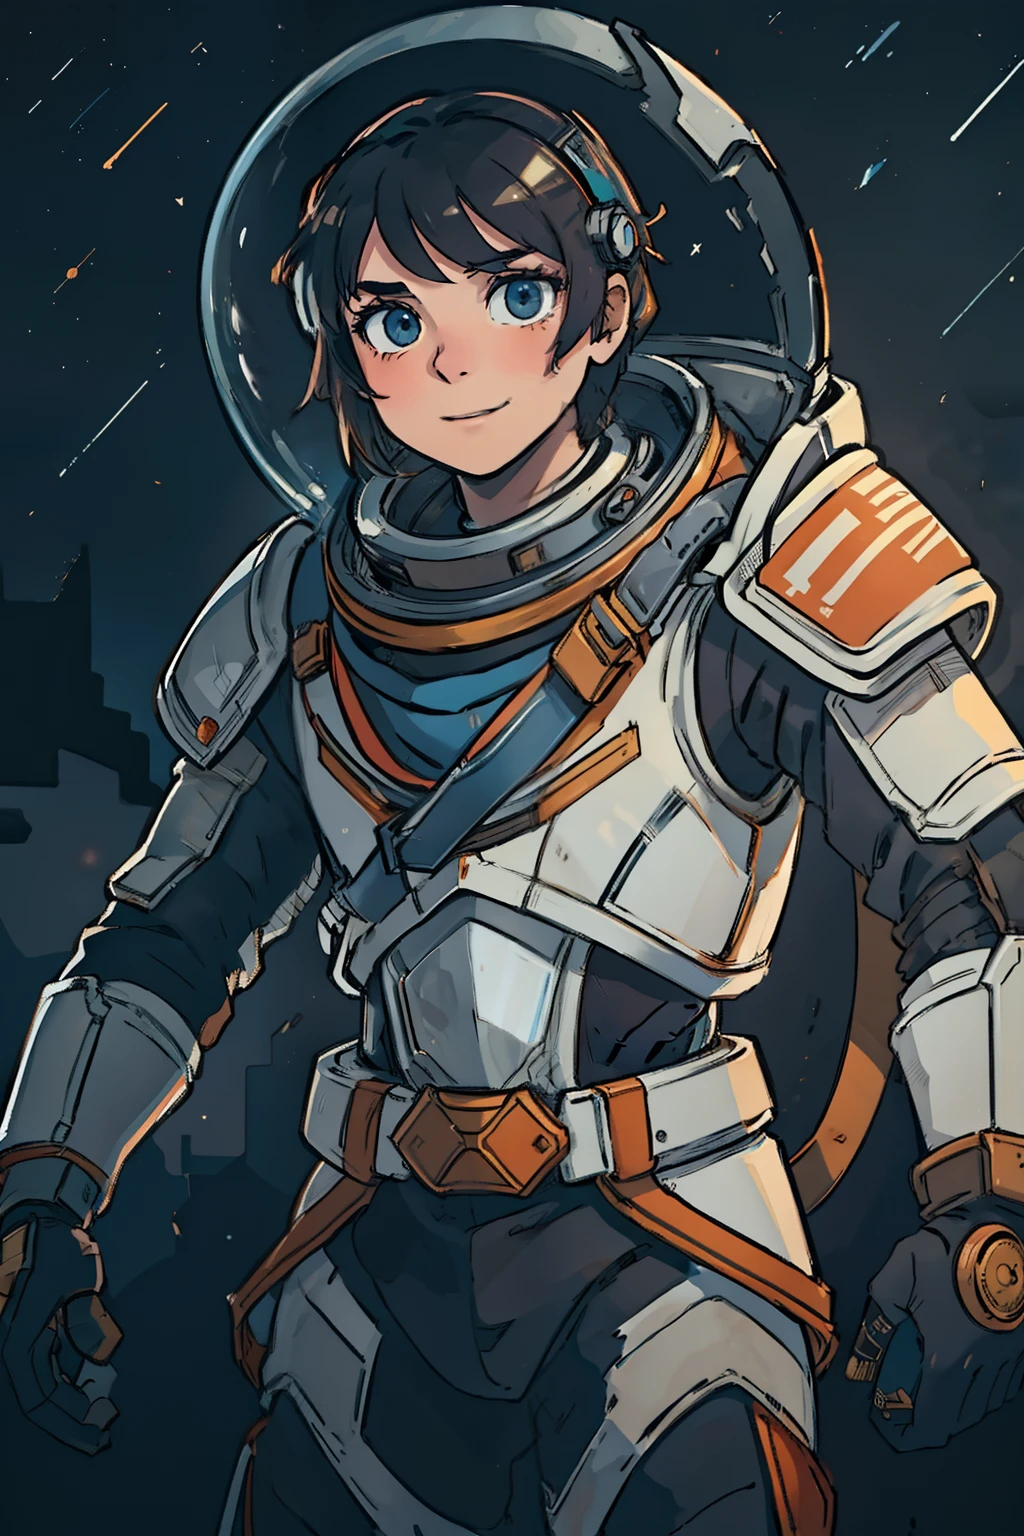 battle scene, professional artwork, detailed eyes, beautiful eyes, beautiful face, flawless face, gorgeous face, smooth features, blush, short hair, beautifully detailed background, adventurous astronaut knight in armored space suit viewed from behind fighting large monster, space suit looks like knight armor, space suit, thick heavy space suit, environment suit, hoses and tubes on suit, dials and switches, space suit backpack, nasa, nasa punk, nasapunk, astronaut, astronaut suit, cosmonaut, medieval knight, knight armor, leather armor and metal armor, mechanical background, sci fi, science fiction, futuristic, fantasy armor, full plate armor, medieval armor, knight helmet, knight visor, grilled faceplate, large helmet, big helmet, heavy collar, vacuum seal ring around neck, life support systems, rustic material, heavy stitching, thick leathers, armored breastplate, armored chest, leather gloves, rustic craftsmanship, adventurous, adventure, cute, smiling, shoulder pads, armor, white and orange outfit, heraldry, sides of head is shaved, cropped haircut, helmet on head, cassette futurism, gloved hands, bulky space suit, bulky suit, tubes and hoses, valves, mechanical, sword and shield, neon light, neon glow, neon, cuirass, pauldrons, chest armor, heavy metal chest armor, beam sword, large robot enemy, plasma sword, light saber, holographic, hero versus enemy, boss fight, david and goliath